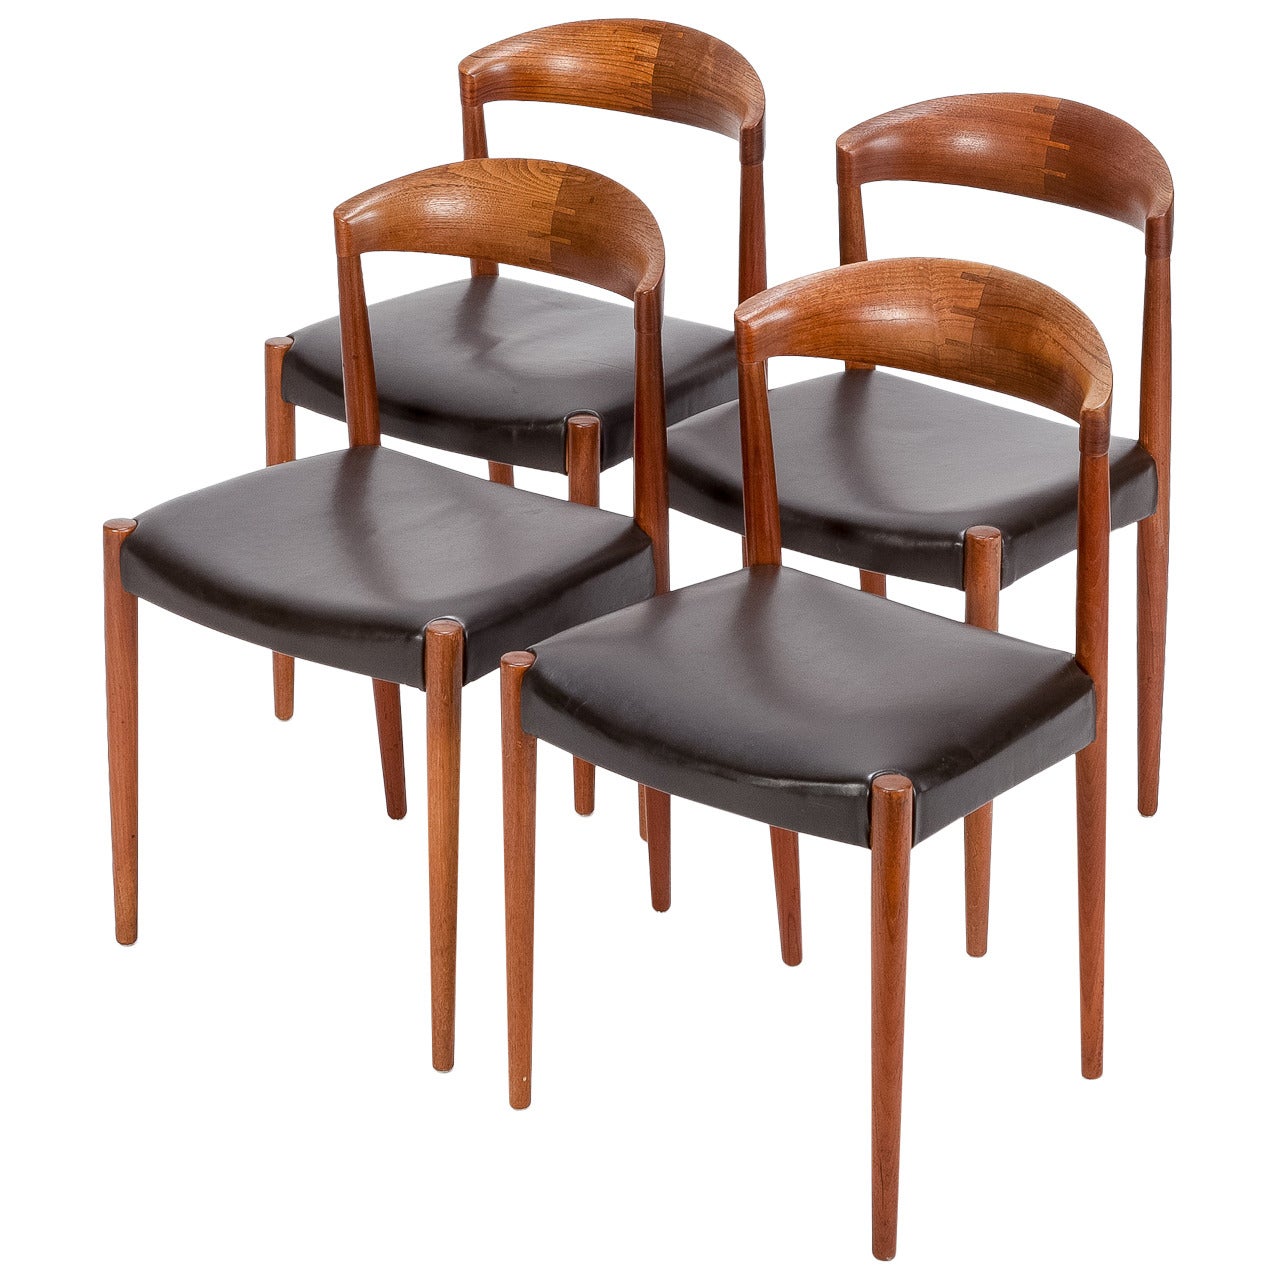 Set of four Danish chairs in teak and leather by Knud Andersen, manufactured in the 1960s. Round shaped backrest with beautiful details, solid constructed with a fine leather cover. In very good condition with a nice and warm patina!